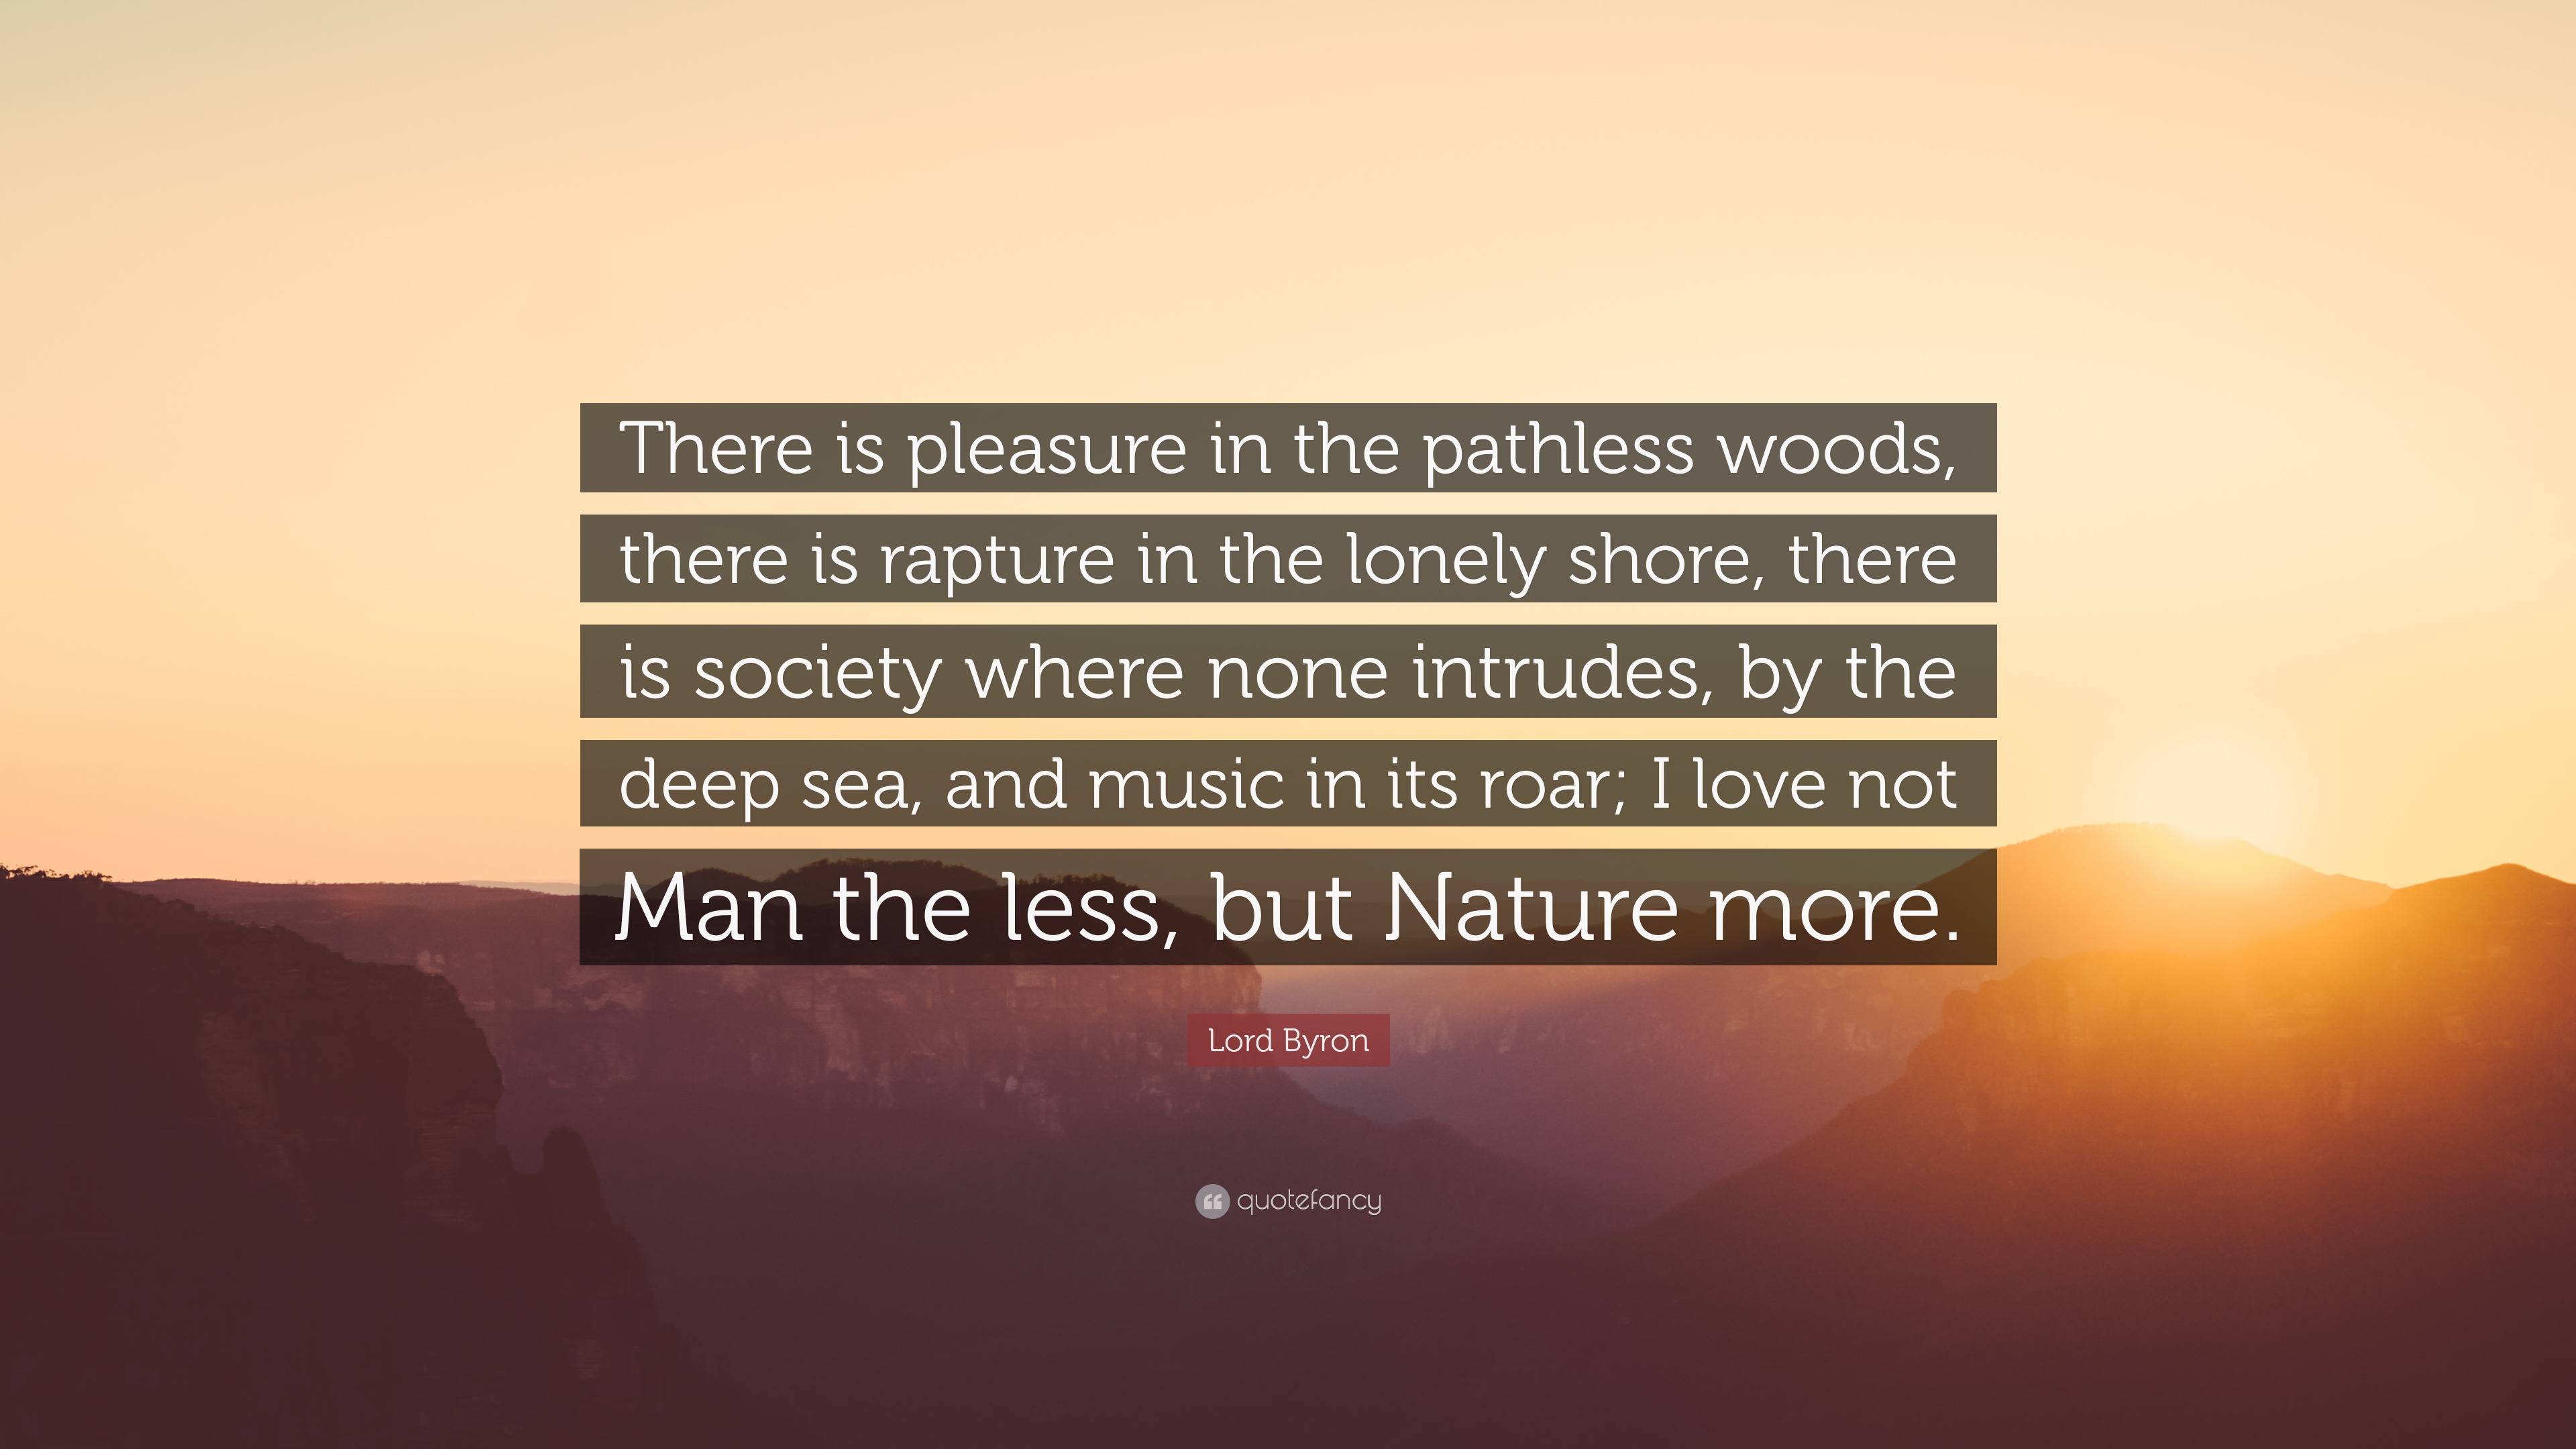 there is pleasure in the pathless woods meaning